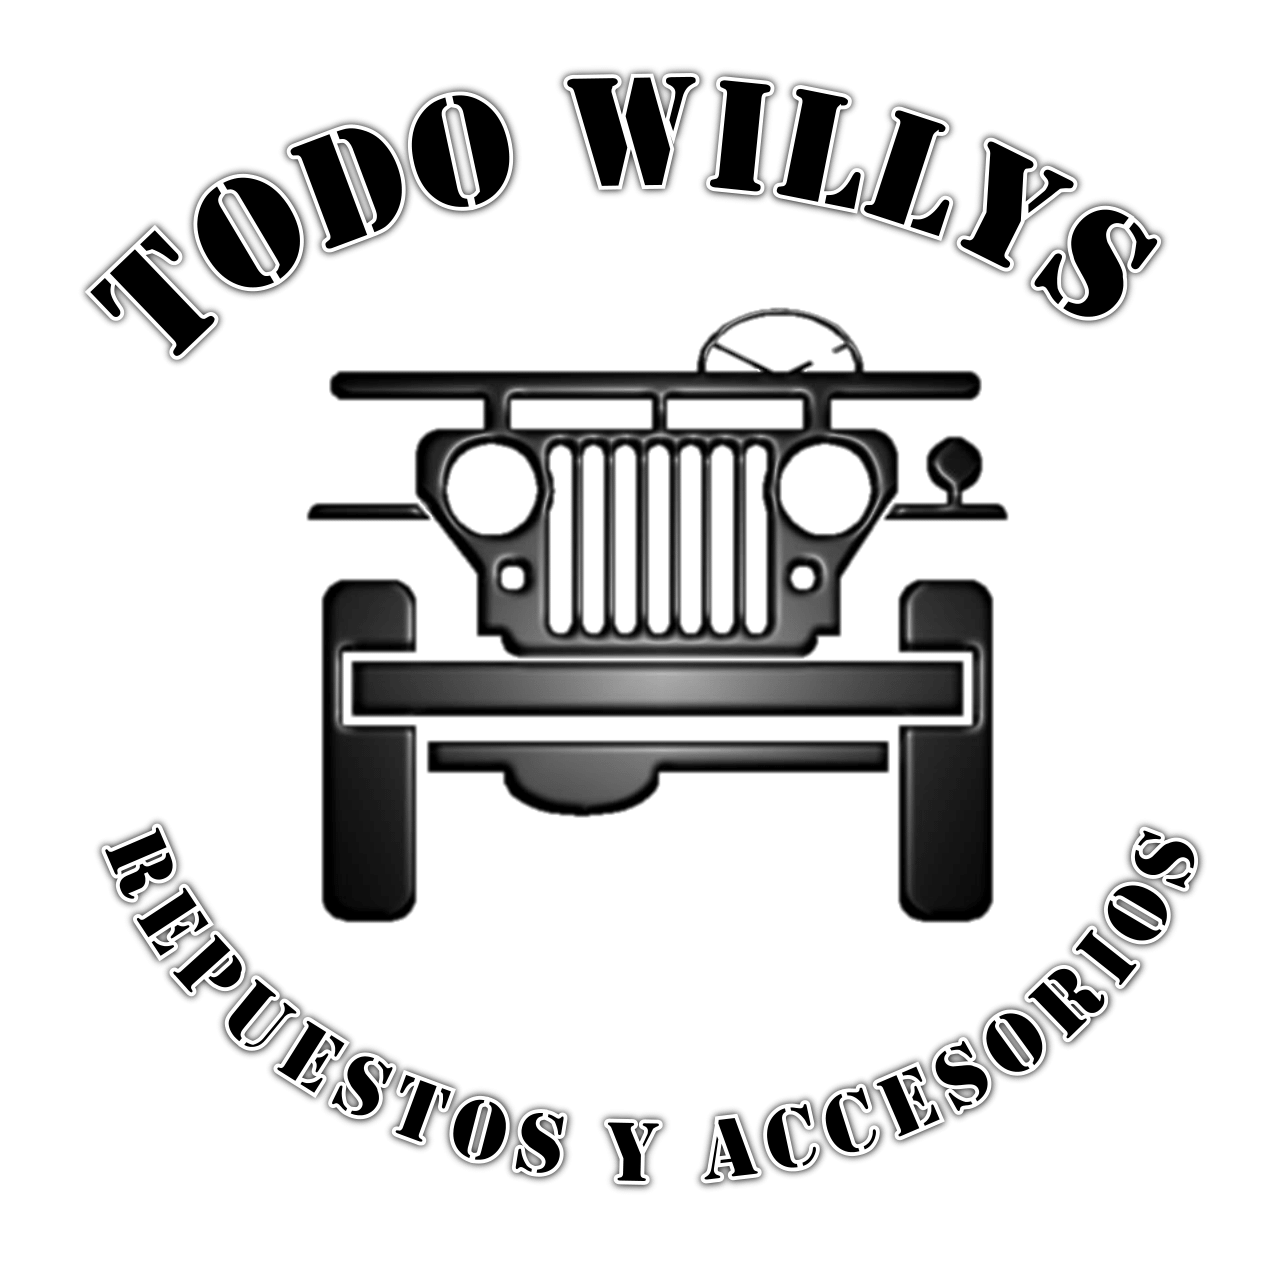 TODO WILLYS